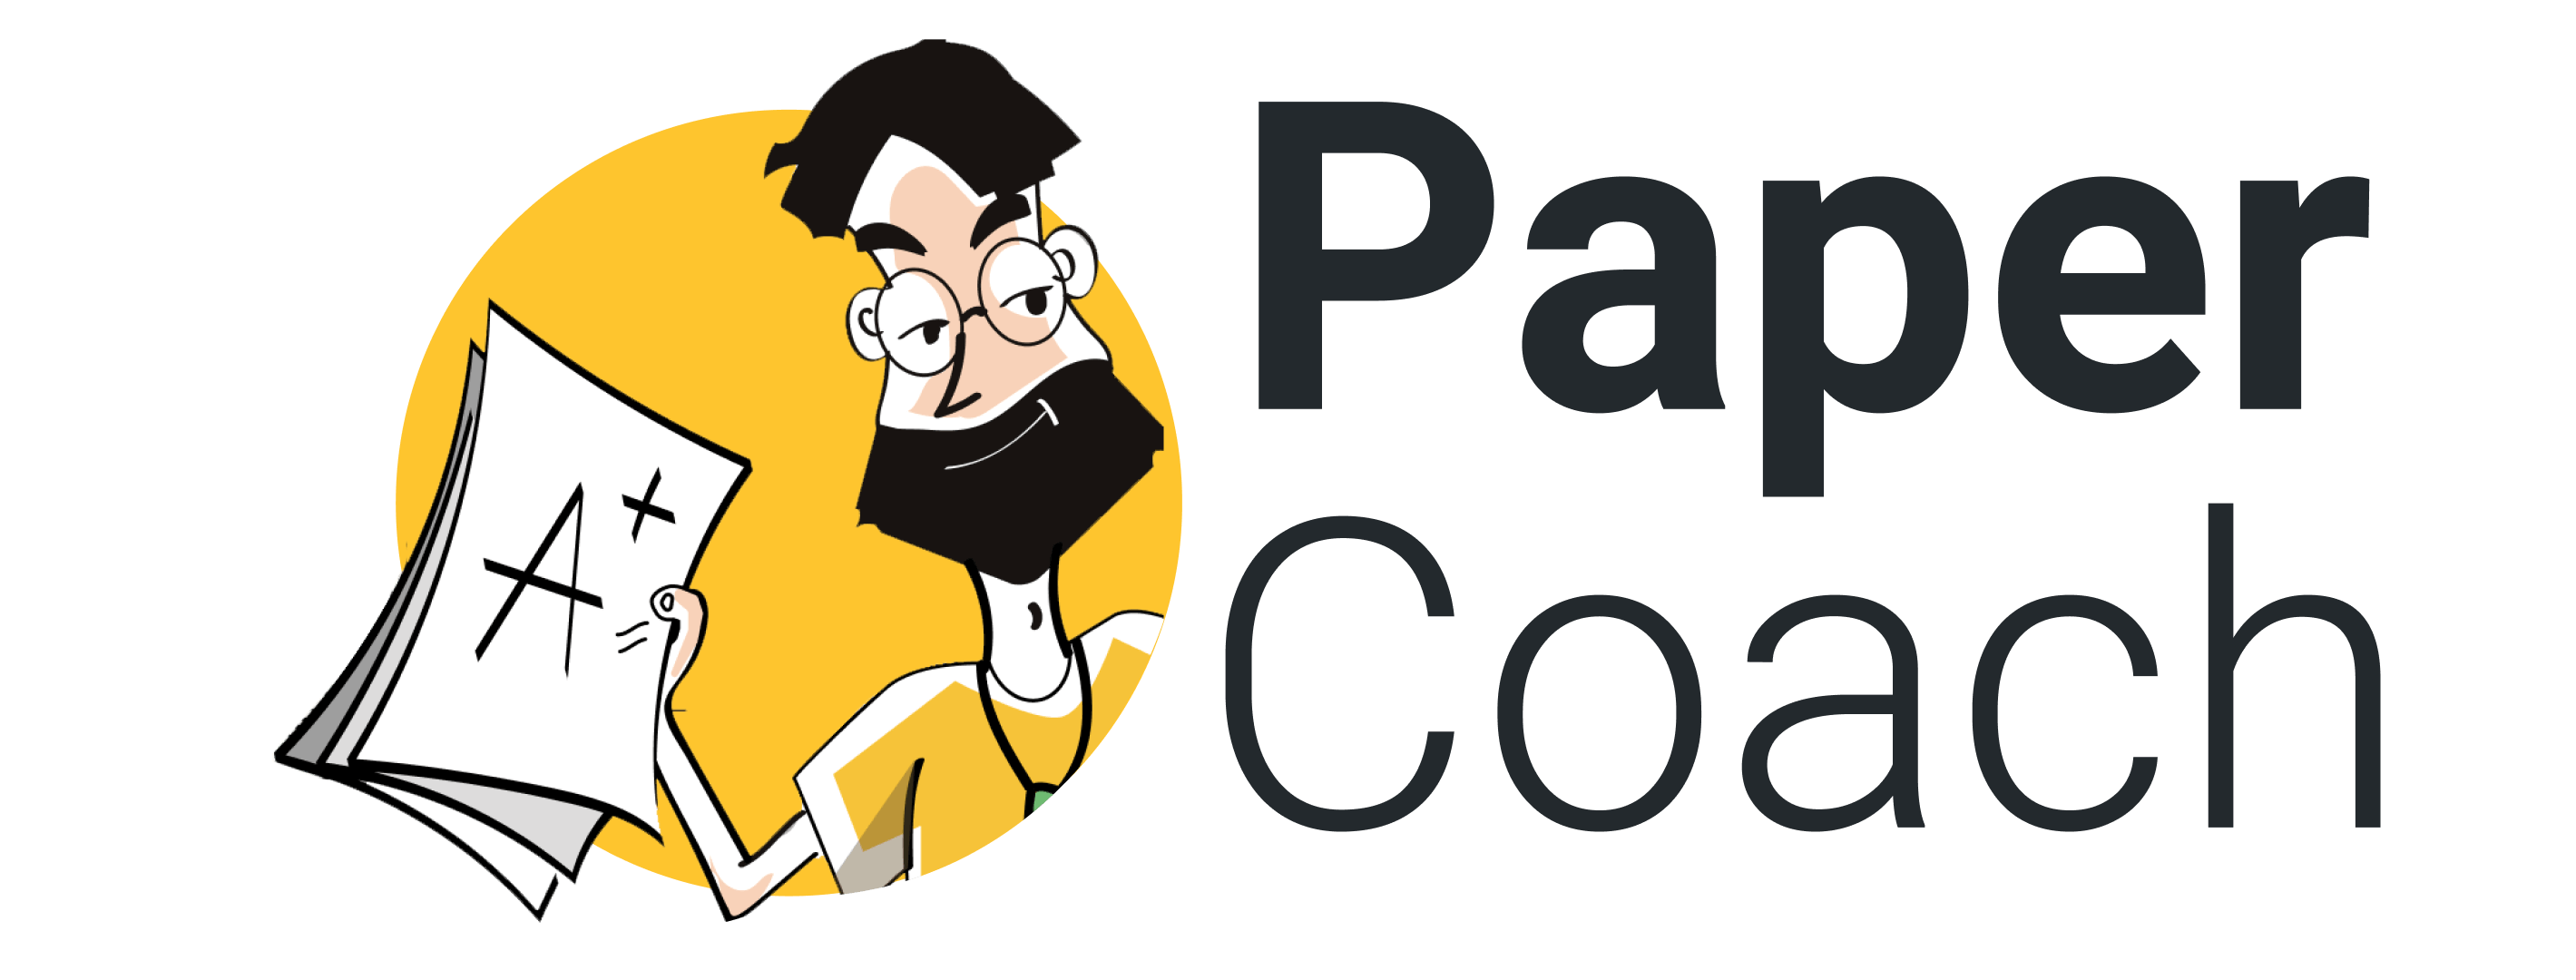 Is Papercoach Safe